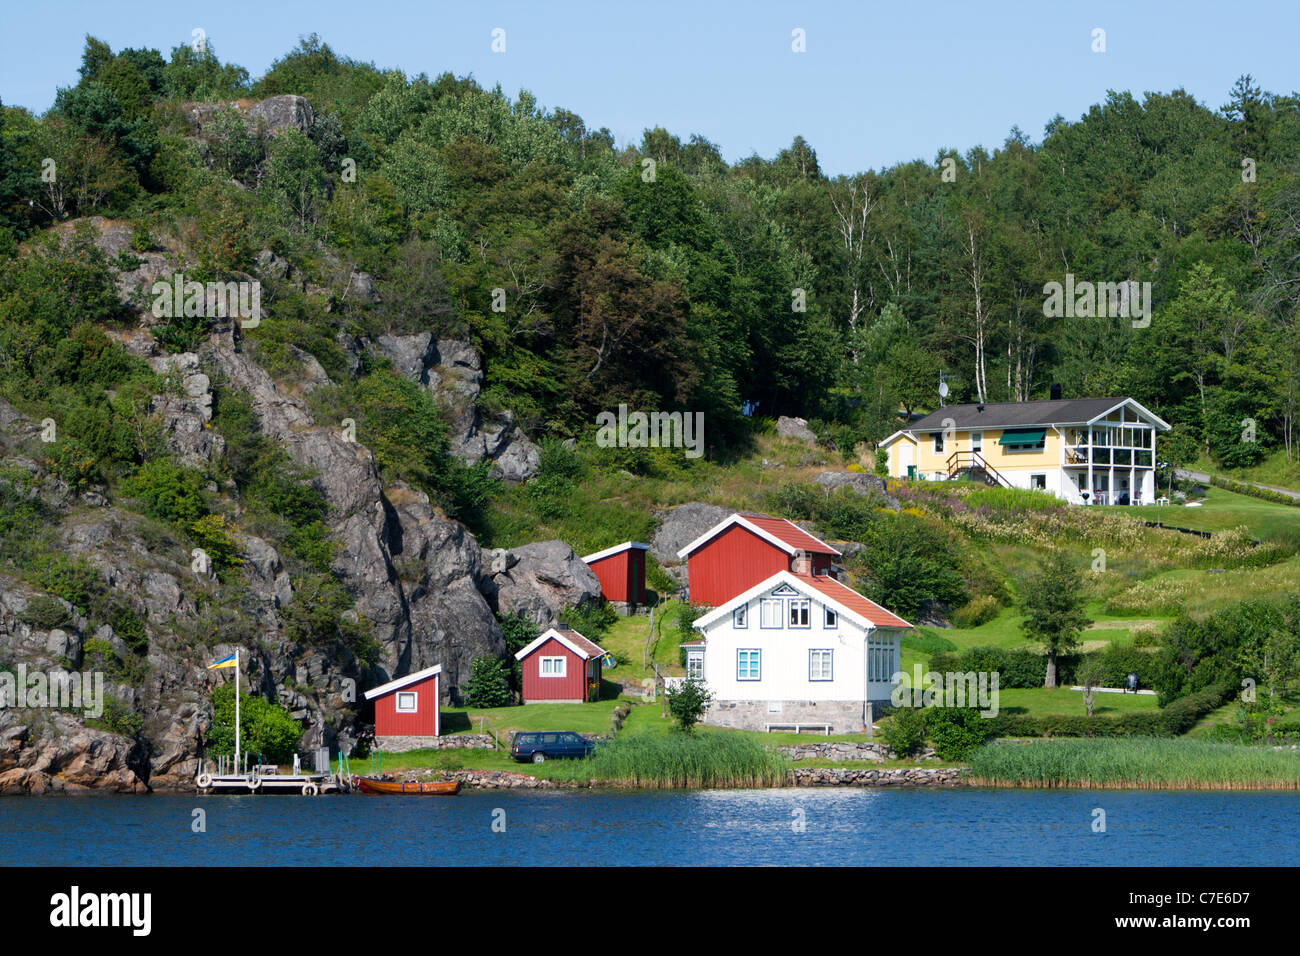 Houses on a lake in Sweden. Stock Photo